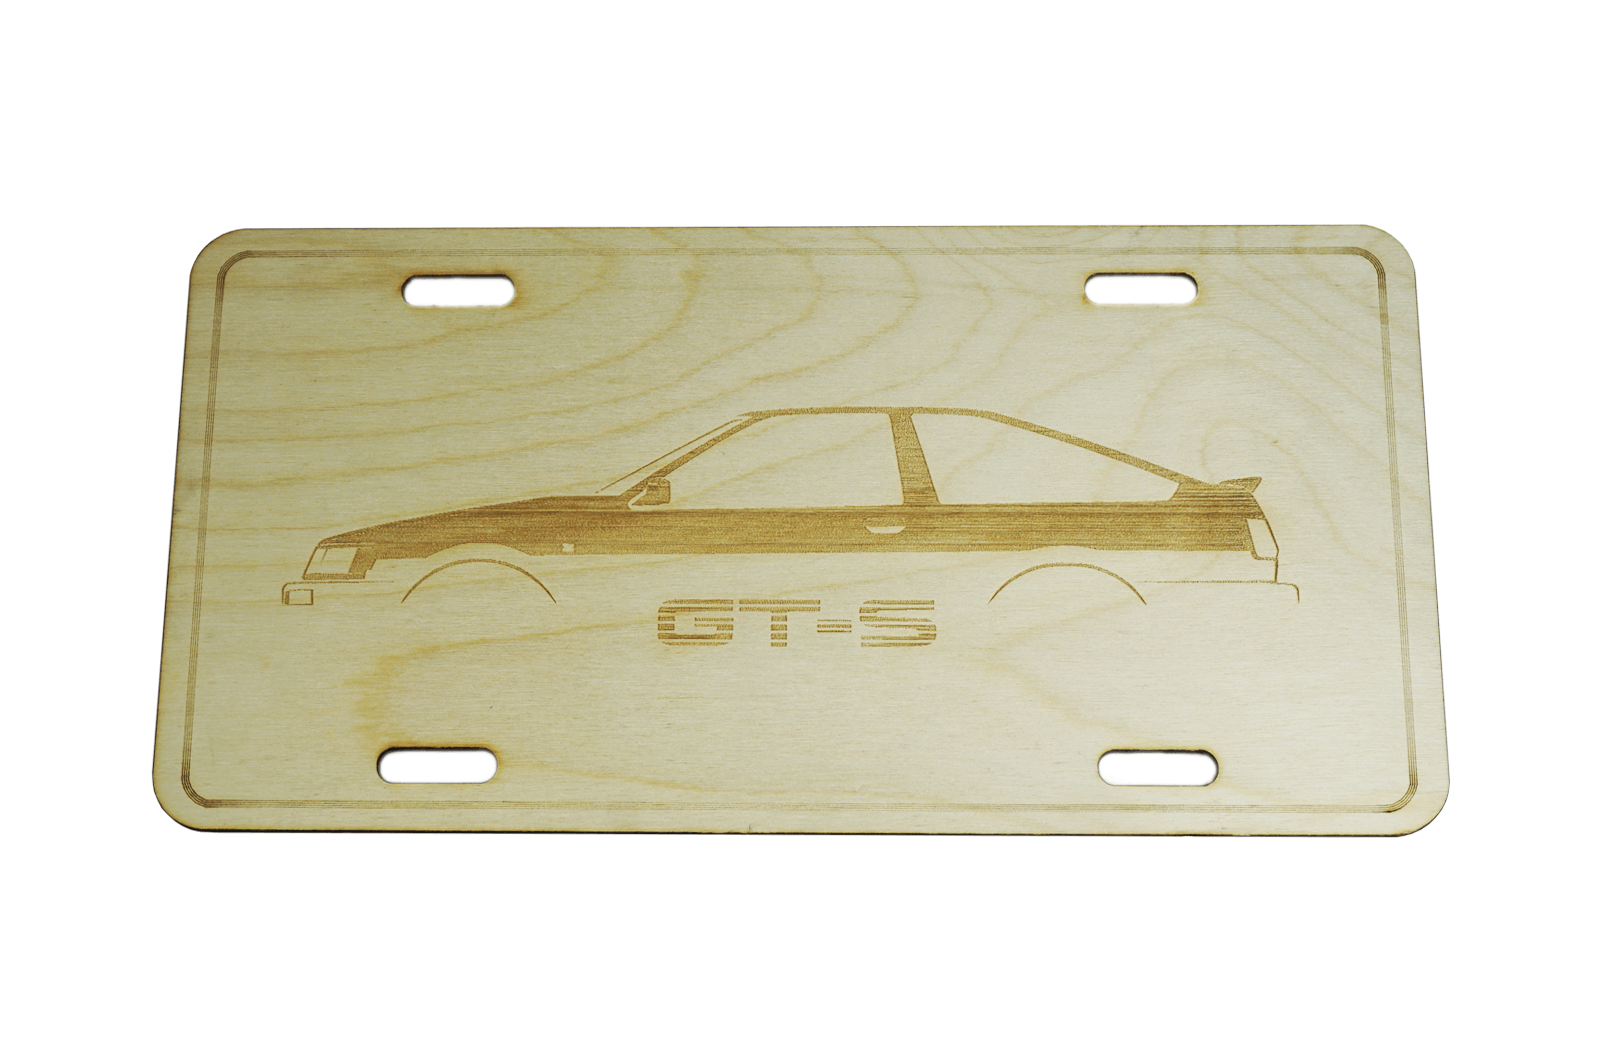 ZSPEC Toyota Corolla GTS License Plate, Birch, Ornament for Office, Garage or Man-Cave